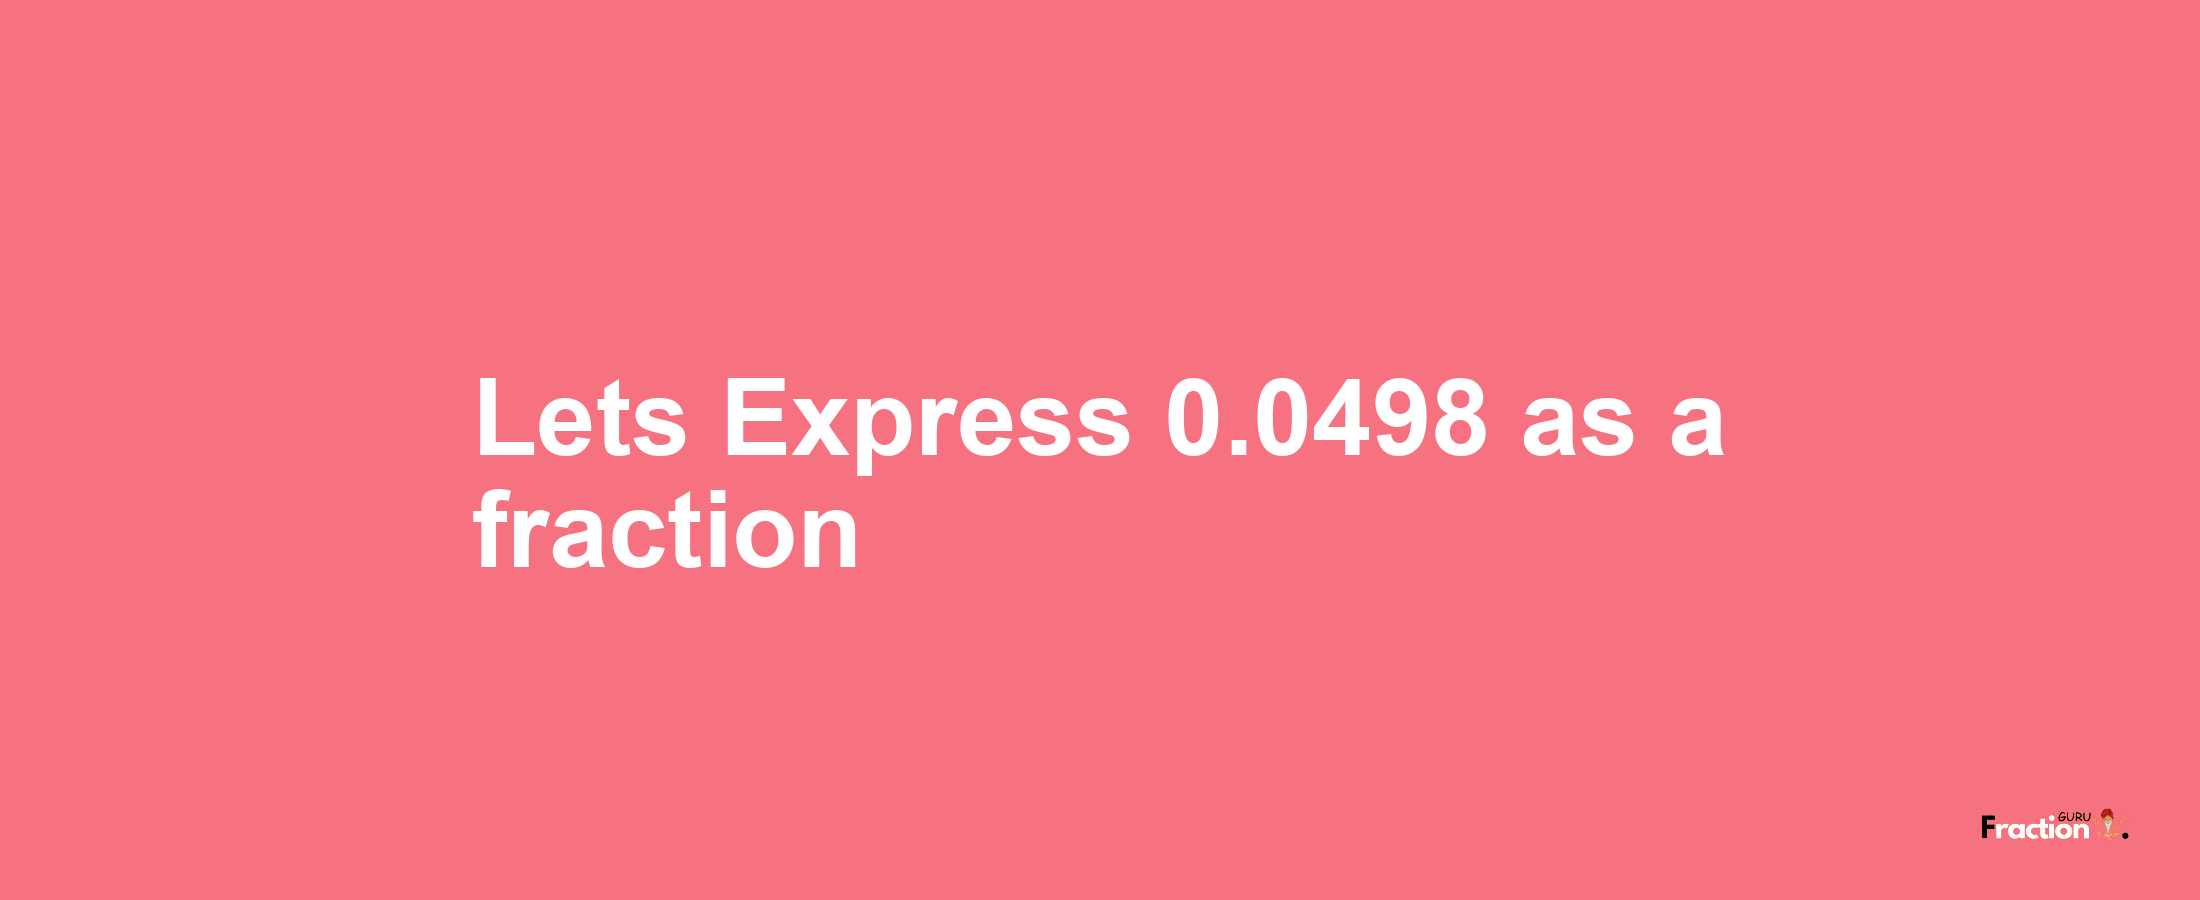 Lets Express 0.0498 as afraction